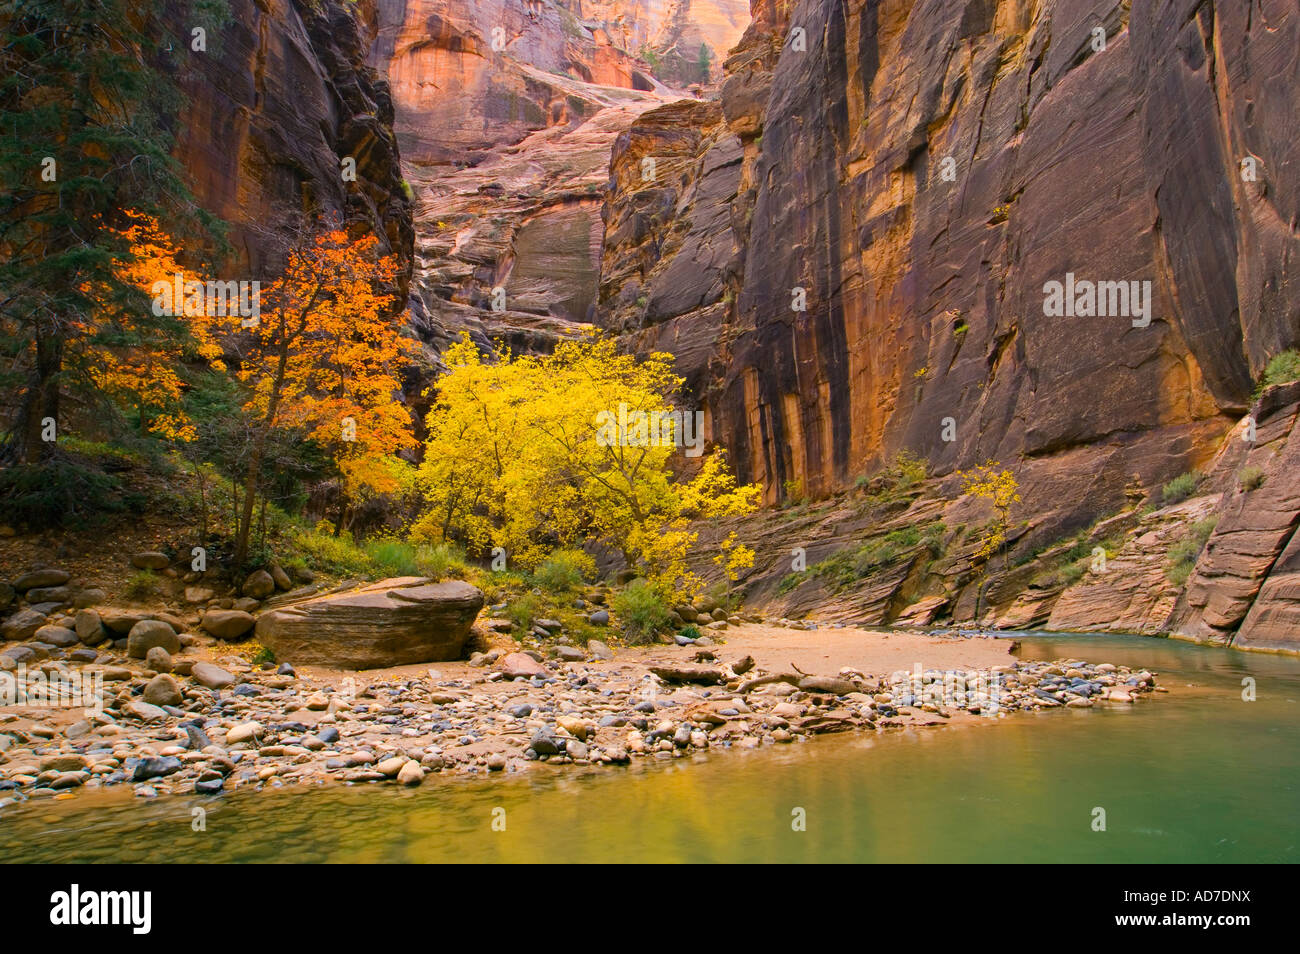 Fall colors on trees in the Virgin River Narrows Zion National Park Utah Stock Photo